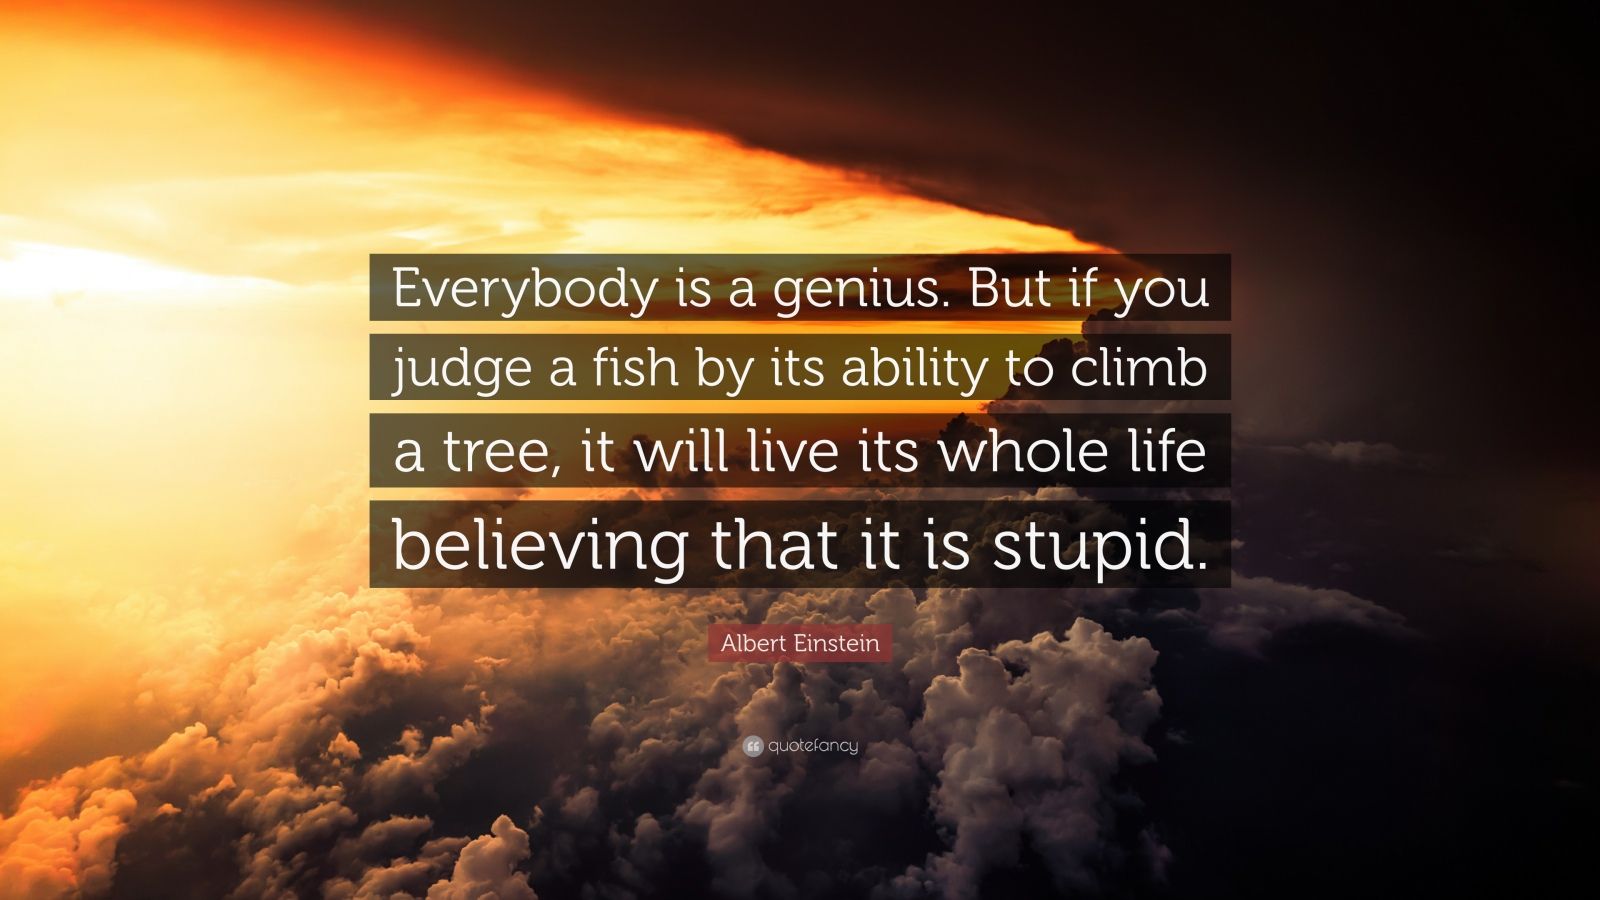 Albert Einstein Quote: “Everybody is a genius. But if you judge a fish